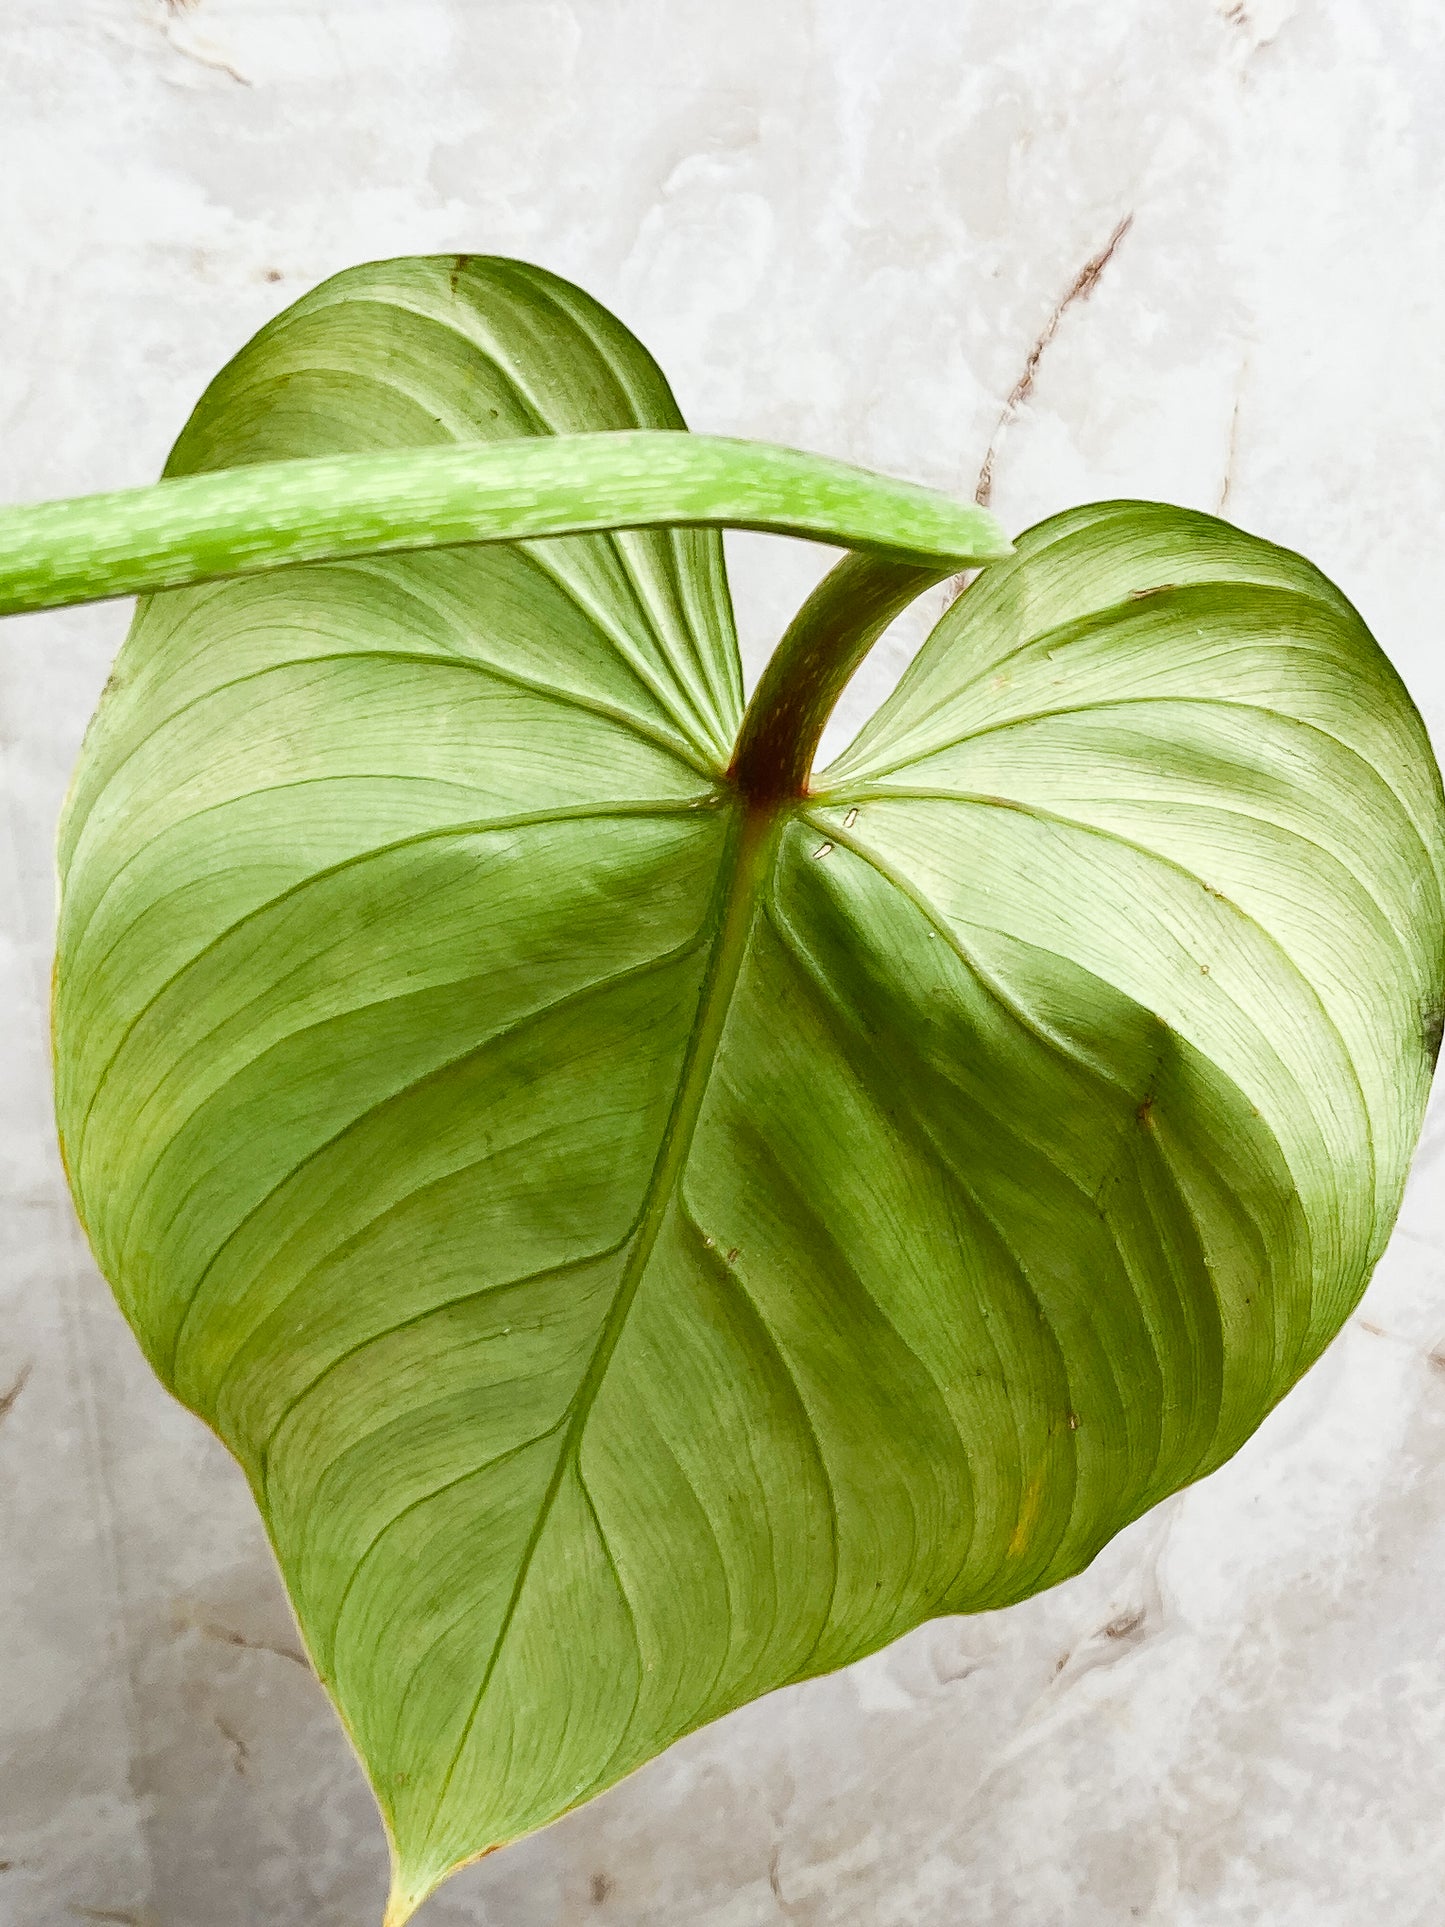 Philodendron  Gloriosum cutting with 1 leaf and 1 unfurling leaf rooting.